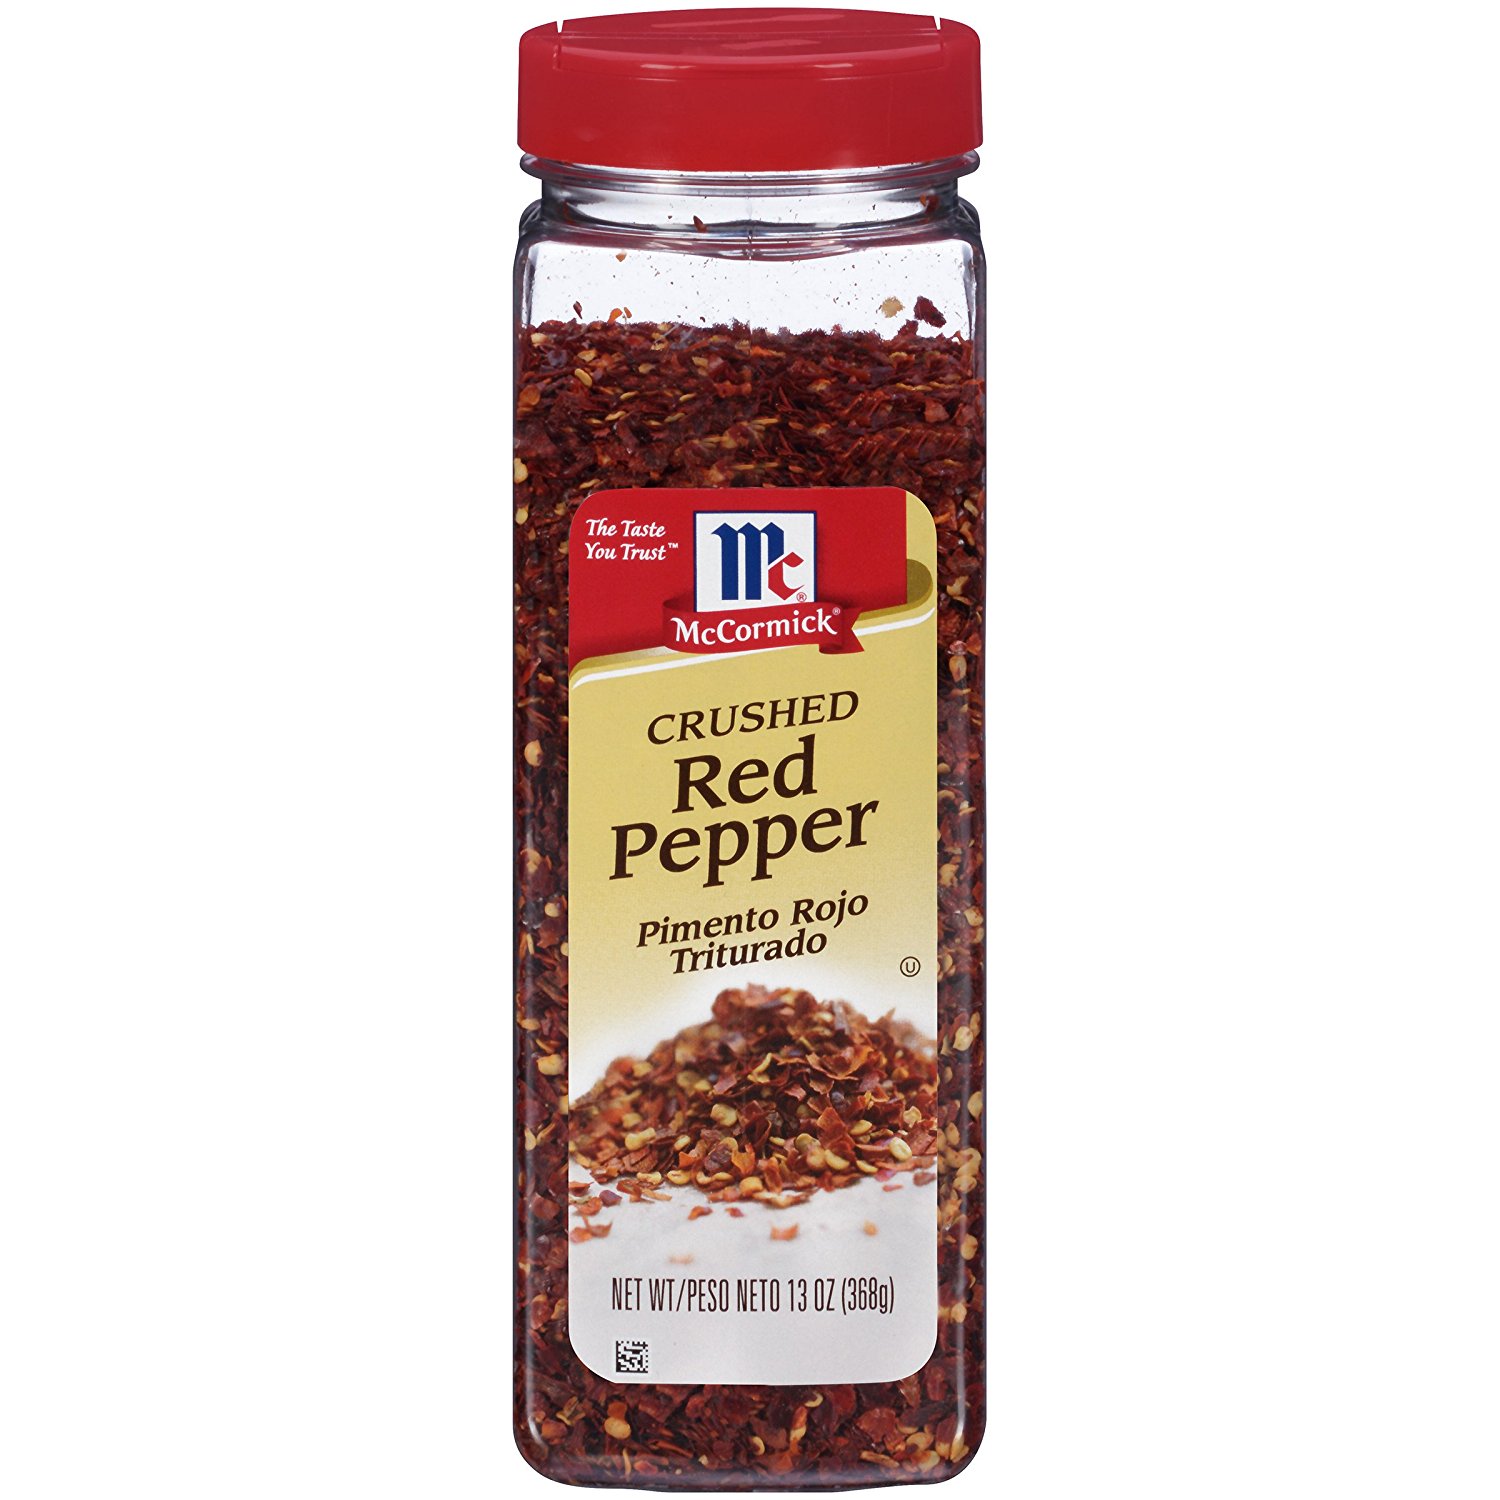 Amazon.com : McCormick Crushed Red Pepper, 13 oz : Ground Peppers ...